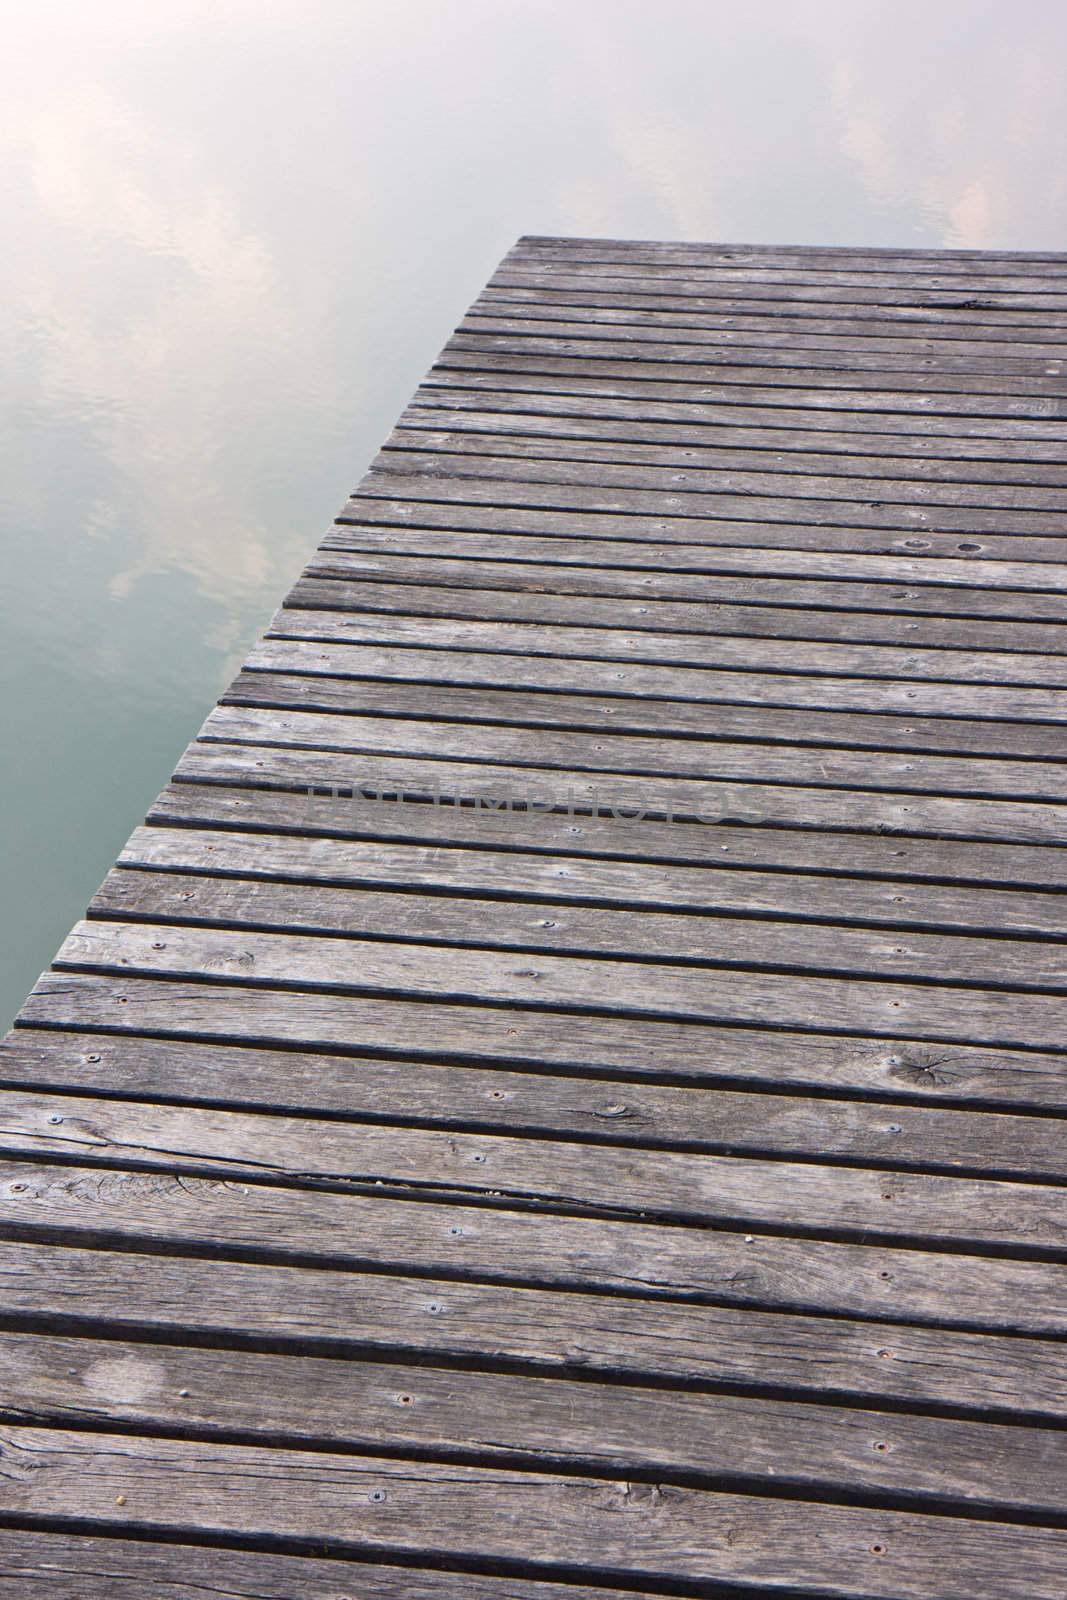 abstract view of a wooden footbridge on a lake by bernjuer